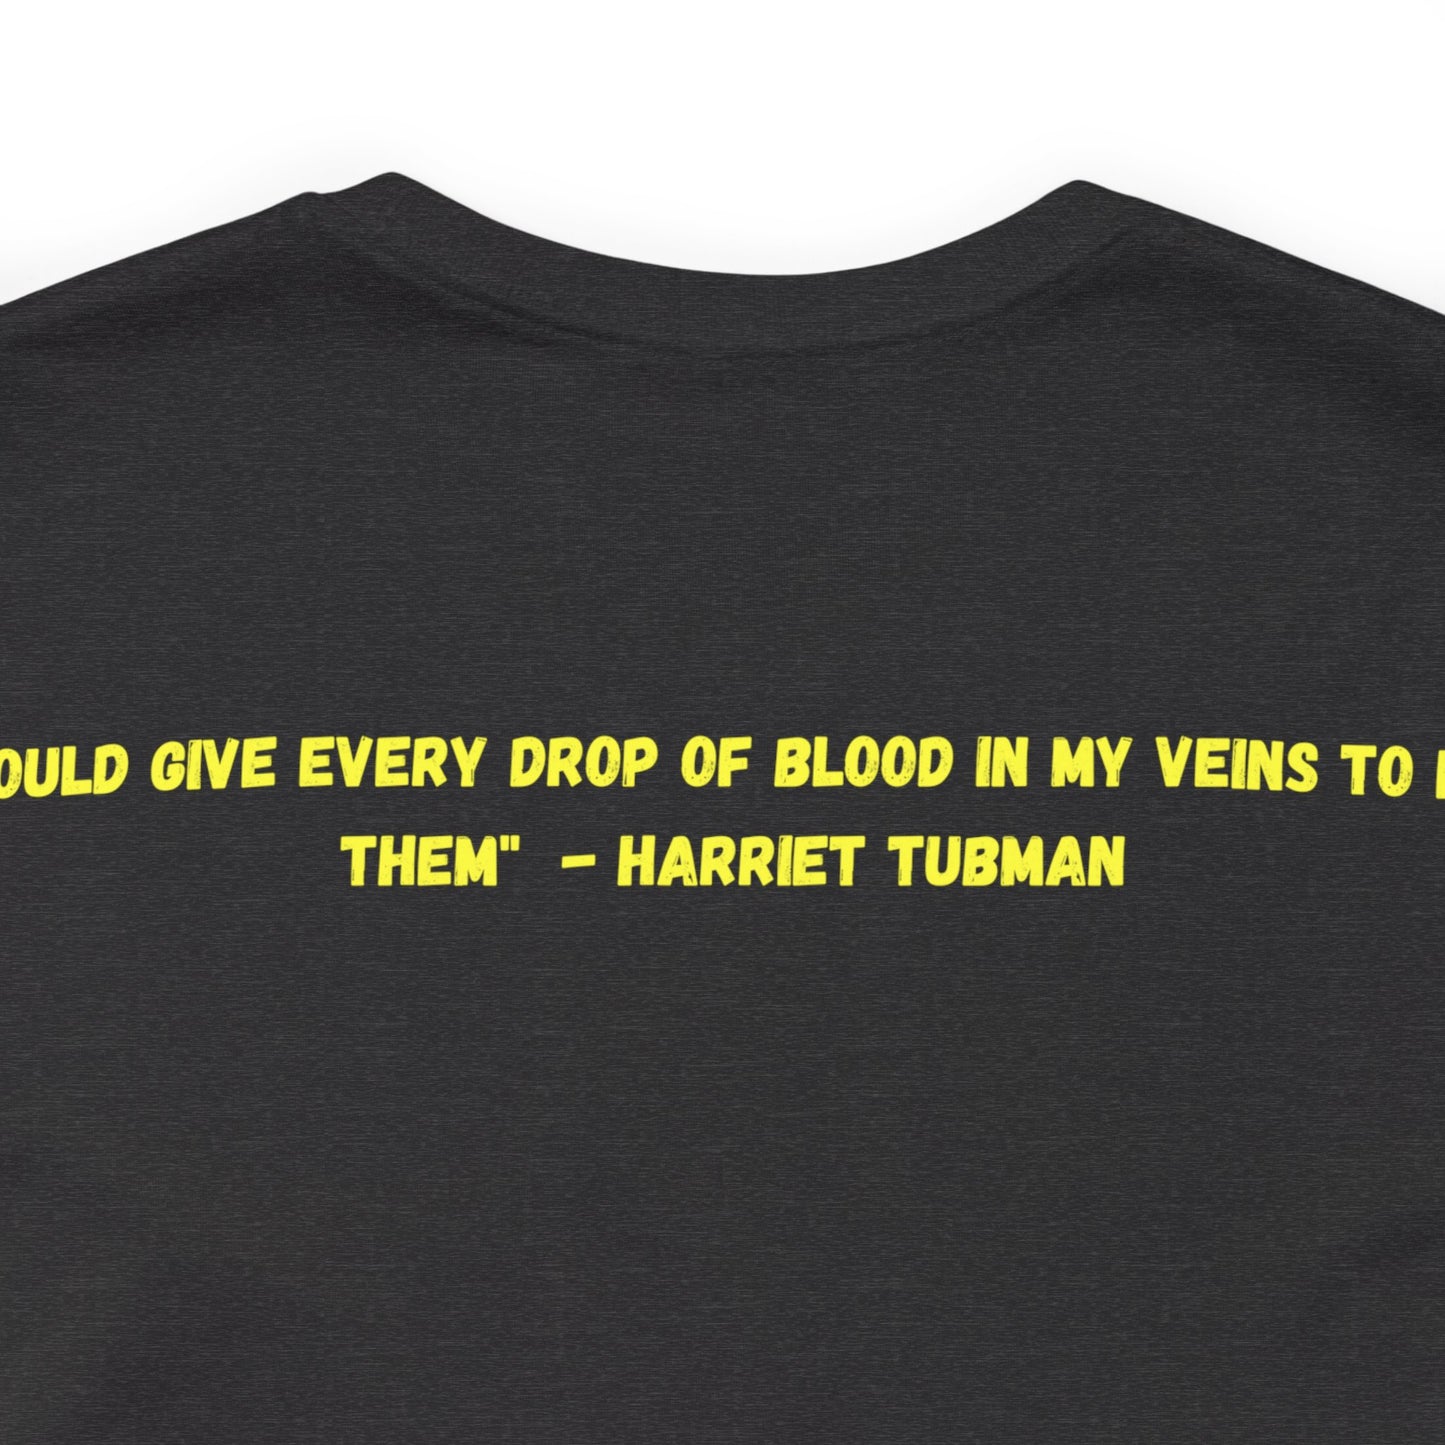 Harriet Tubman | T-Shirt | Mother Moses | Black History | Freedom Fighter | Insprirational Gift | Historical Women | Unisex | Men's | Women's | Front & Back | Tee